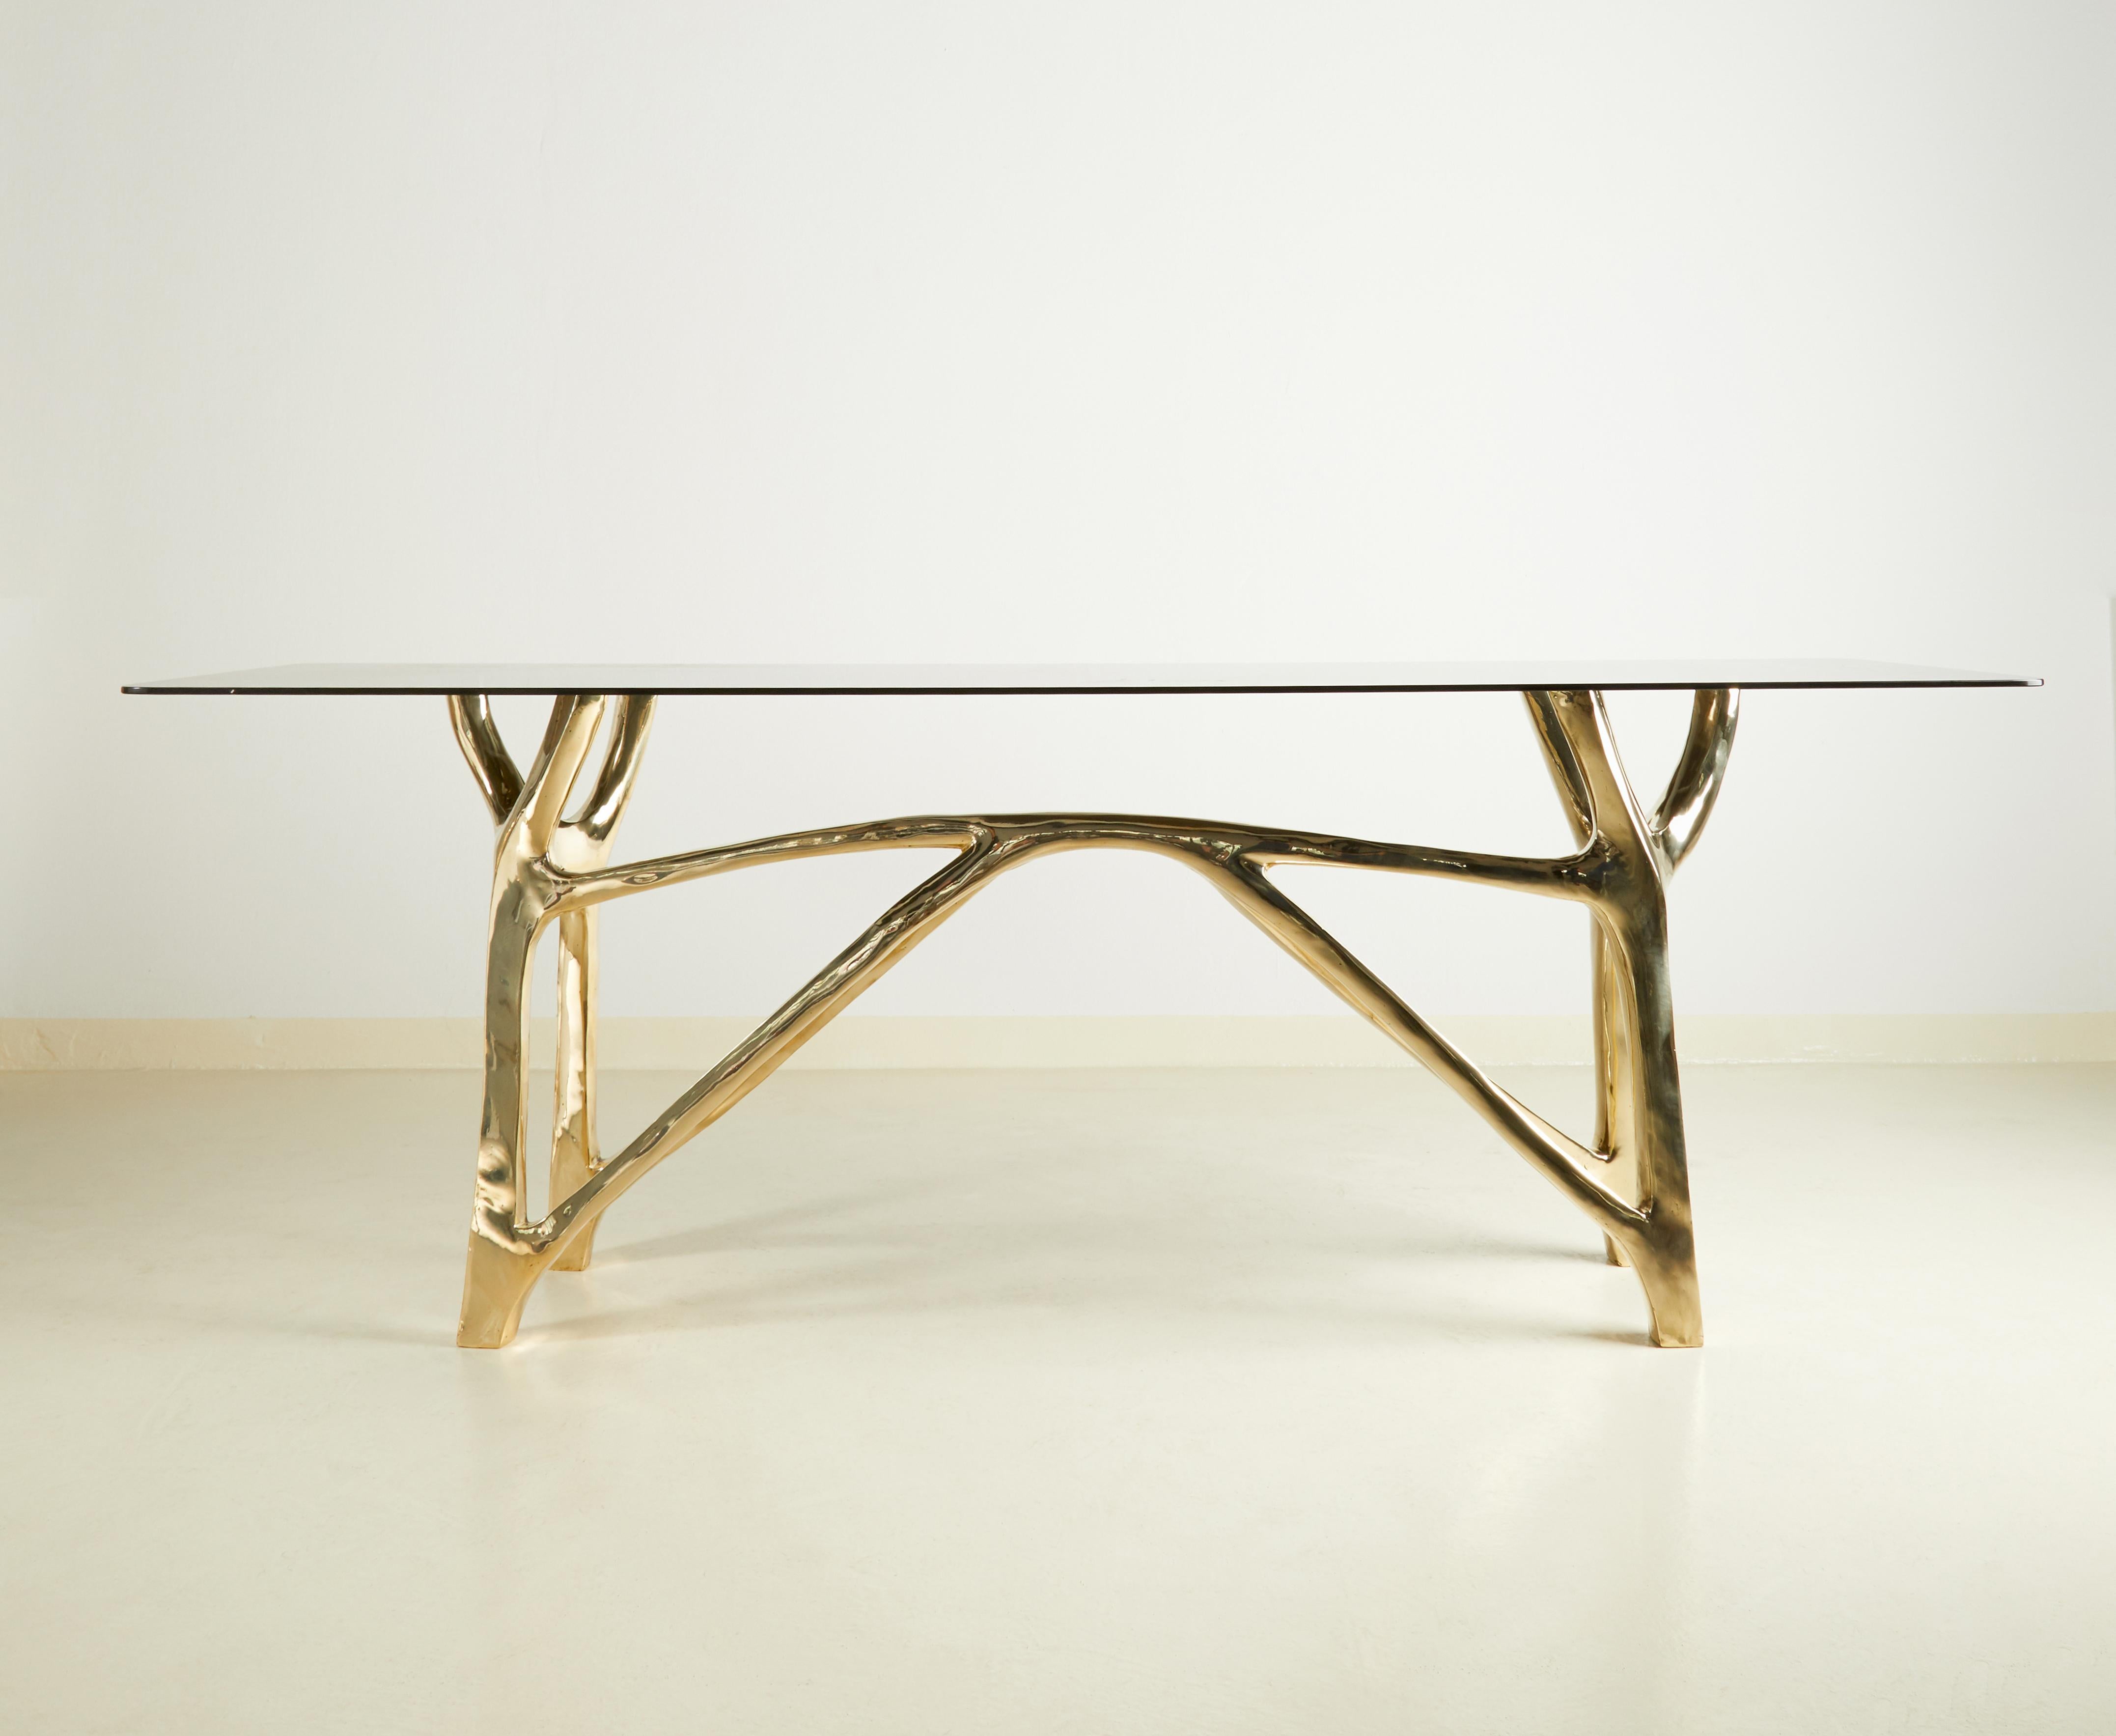 Brass sculpted console table - Golden symmetry - Misaya
Dimensions: W 150 x L 37 x H 70 cm.
Hand-sculpted brass table.
Sold without the glass top.